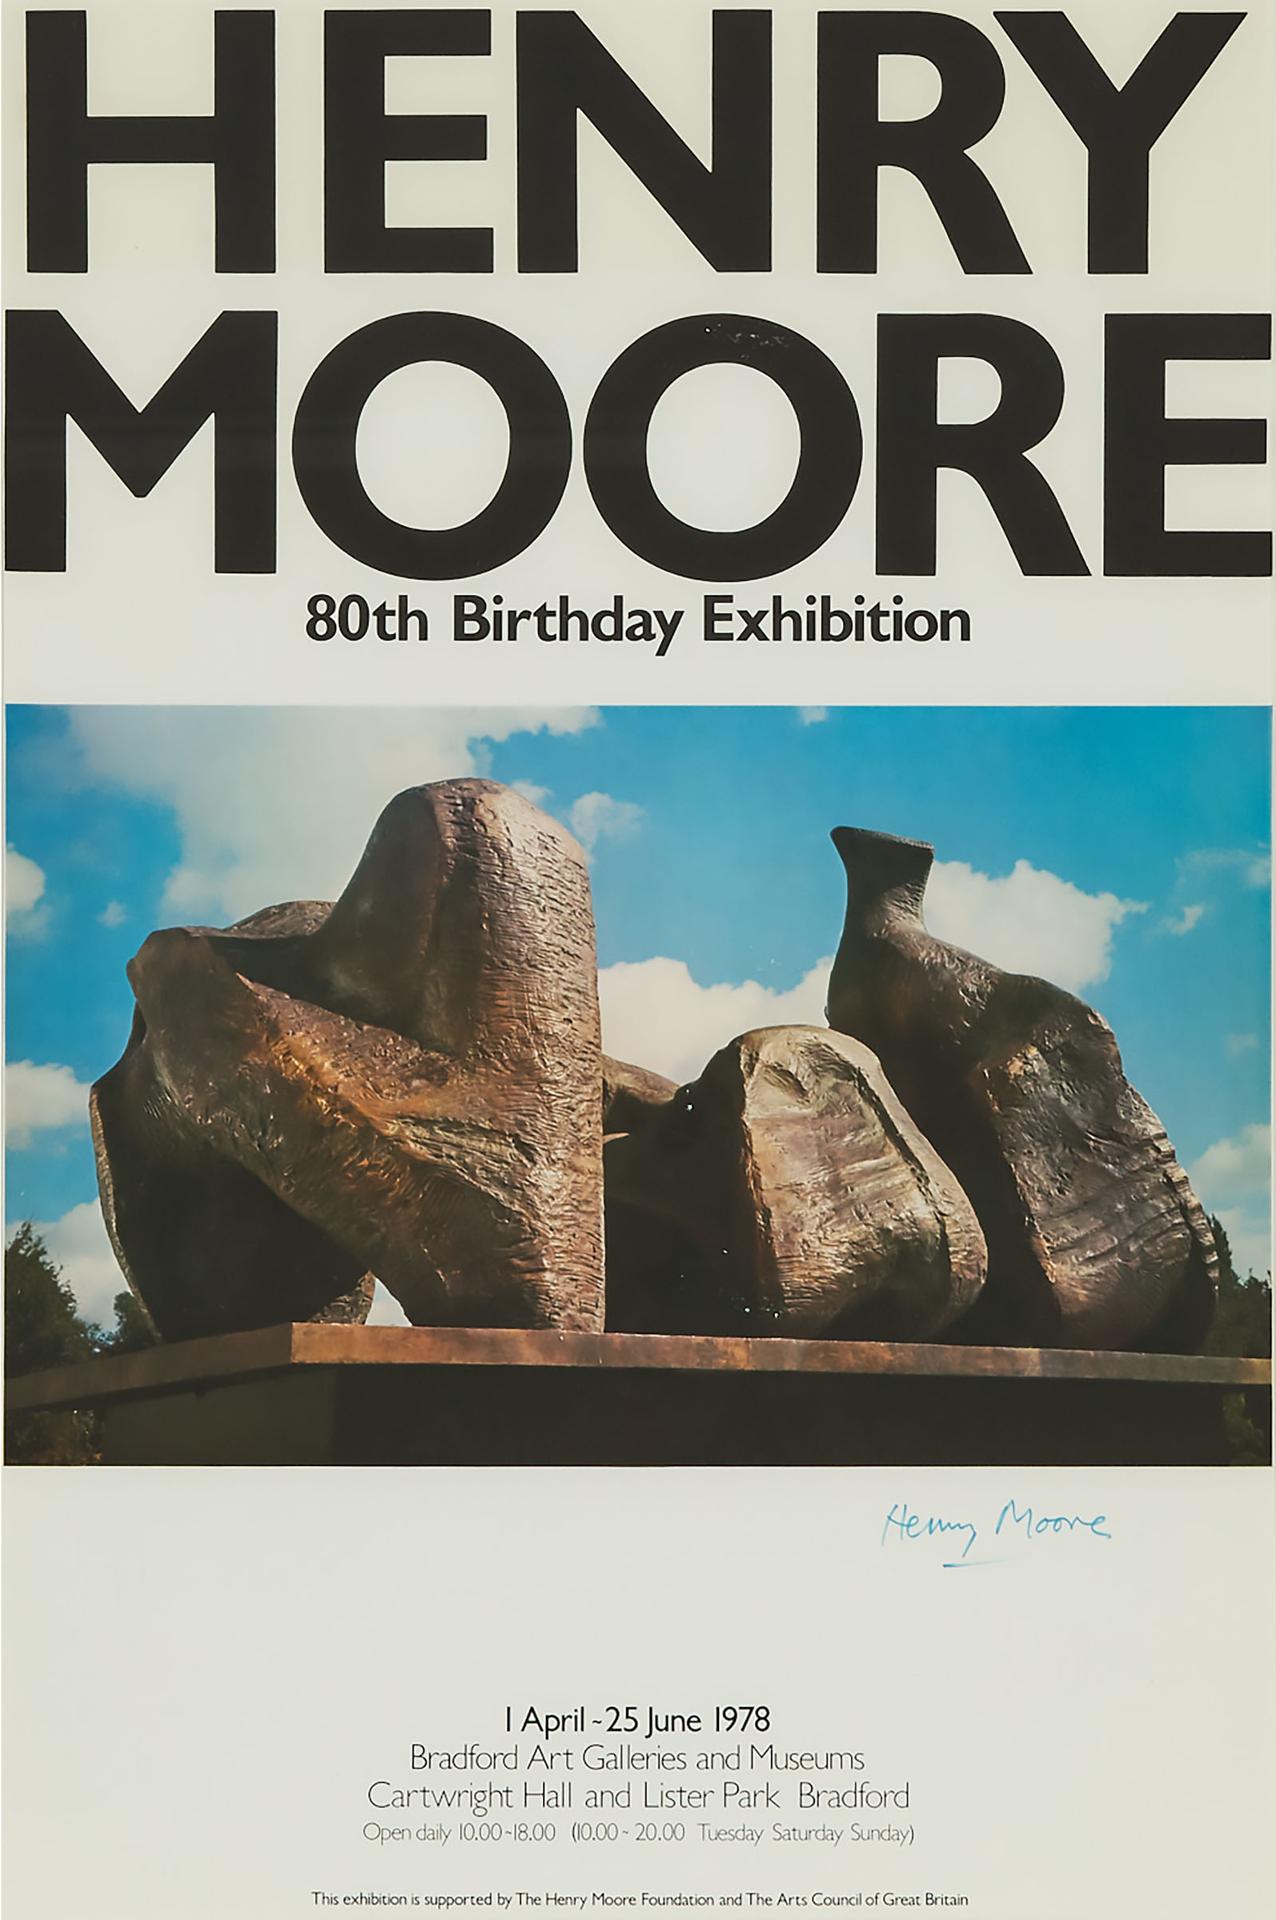 Henry Spencer Moore (1898-1986) - 80th Birthday Exhibition Poster, 1978